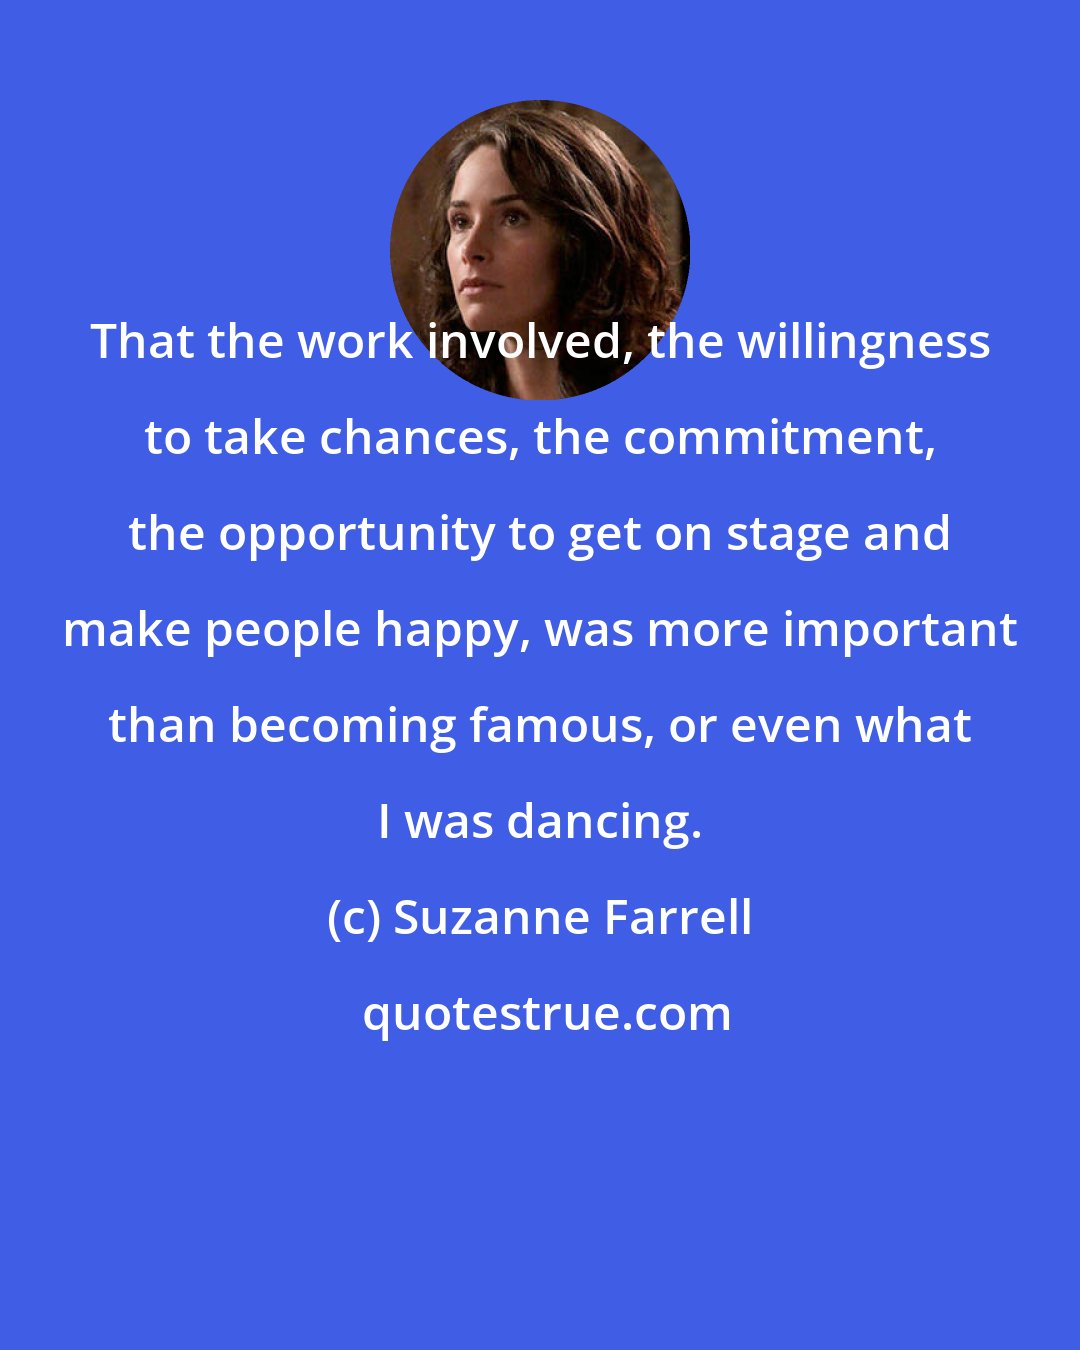 Suzanne Farrell: That the work involved, the willingness to take chances, the commitment, the opportunity to get on stage and make people happy, was more important than becoming famous, or even what I was dancing.